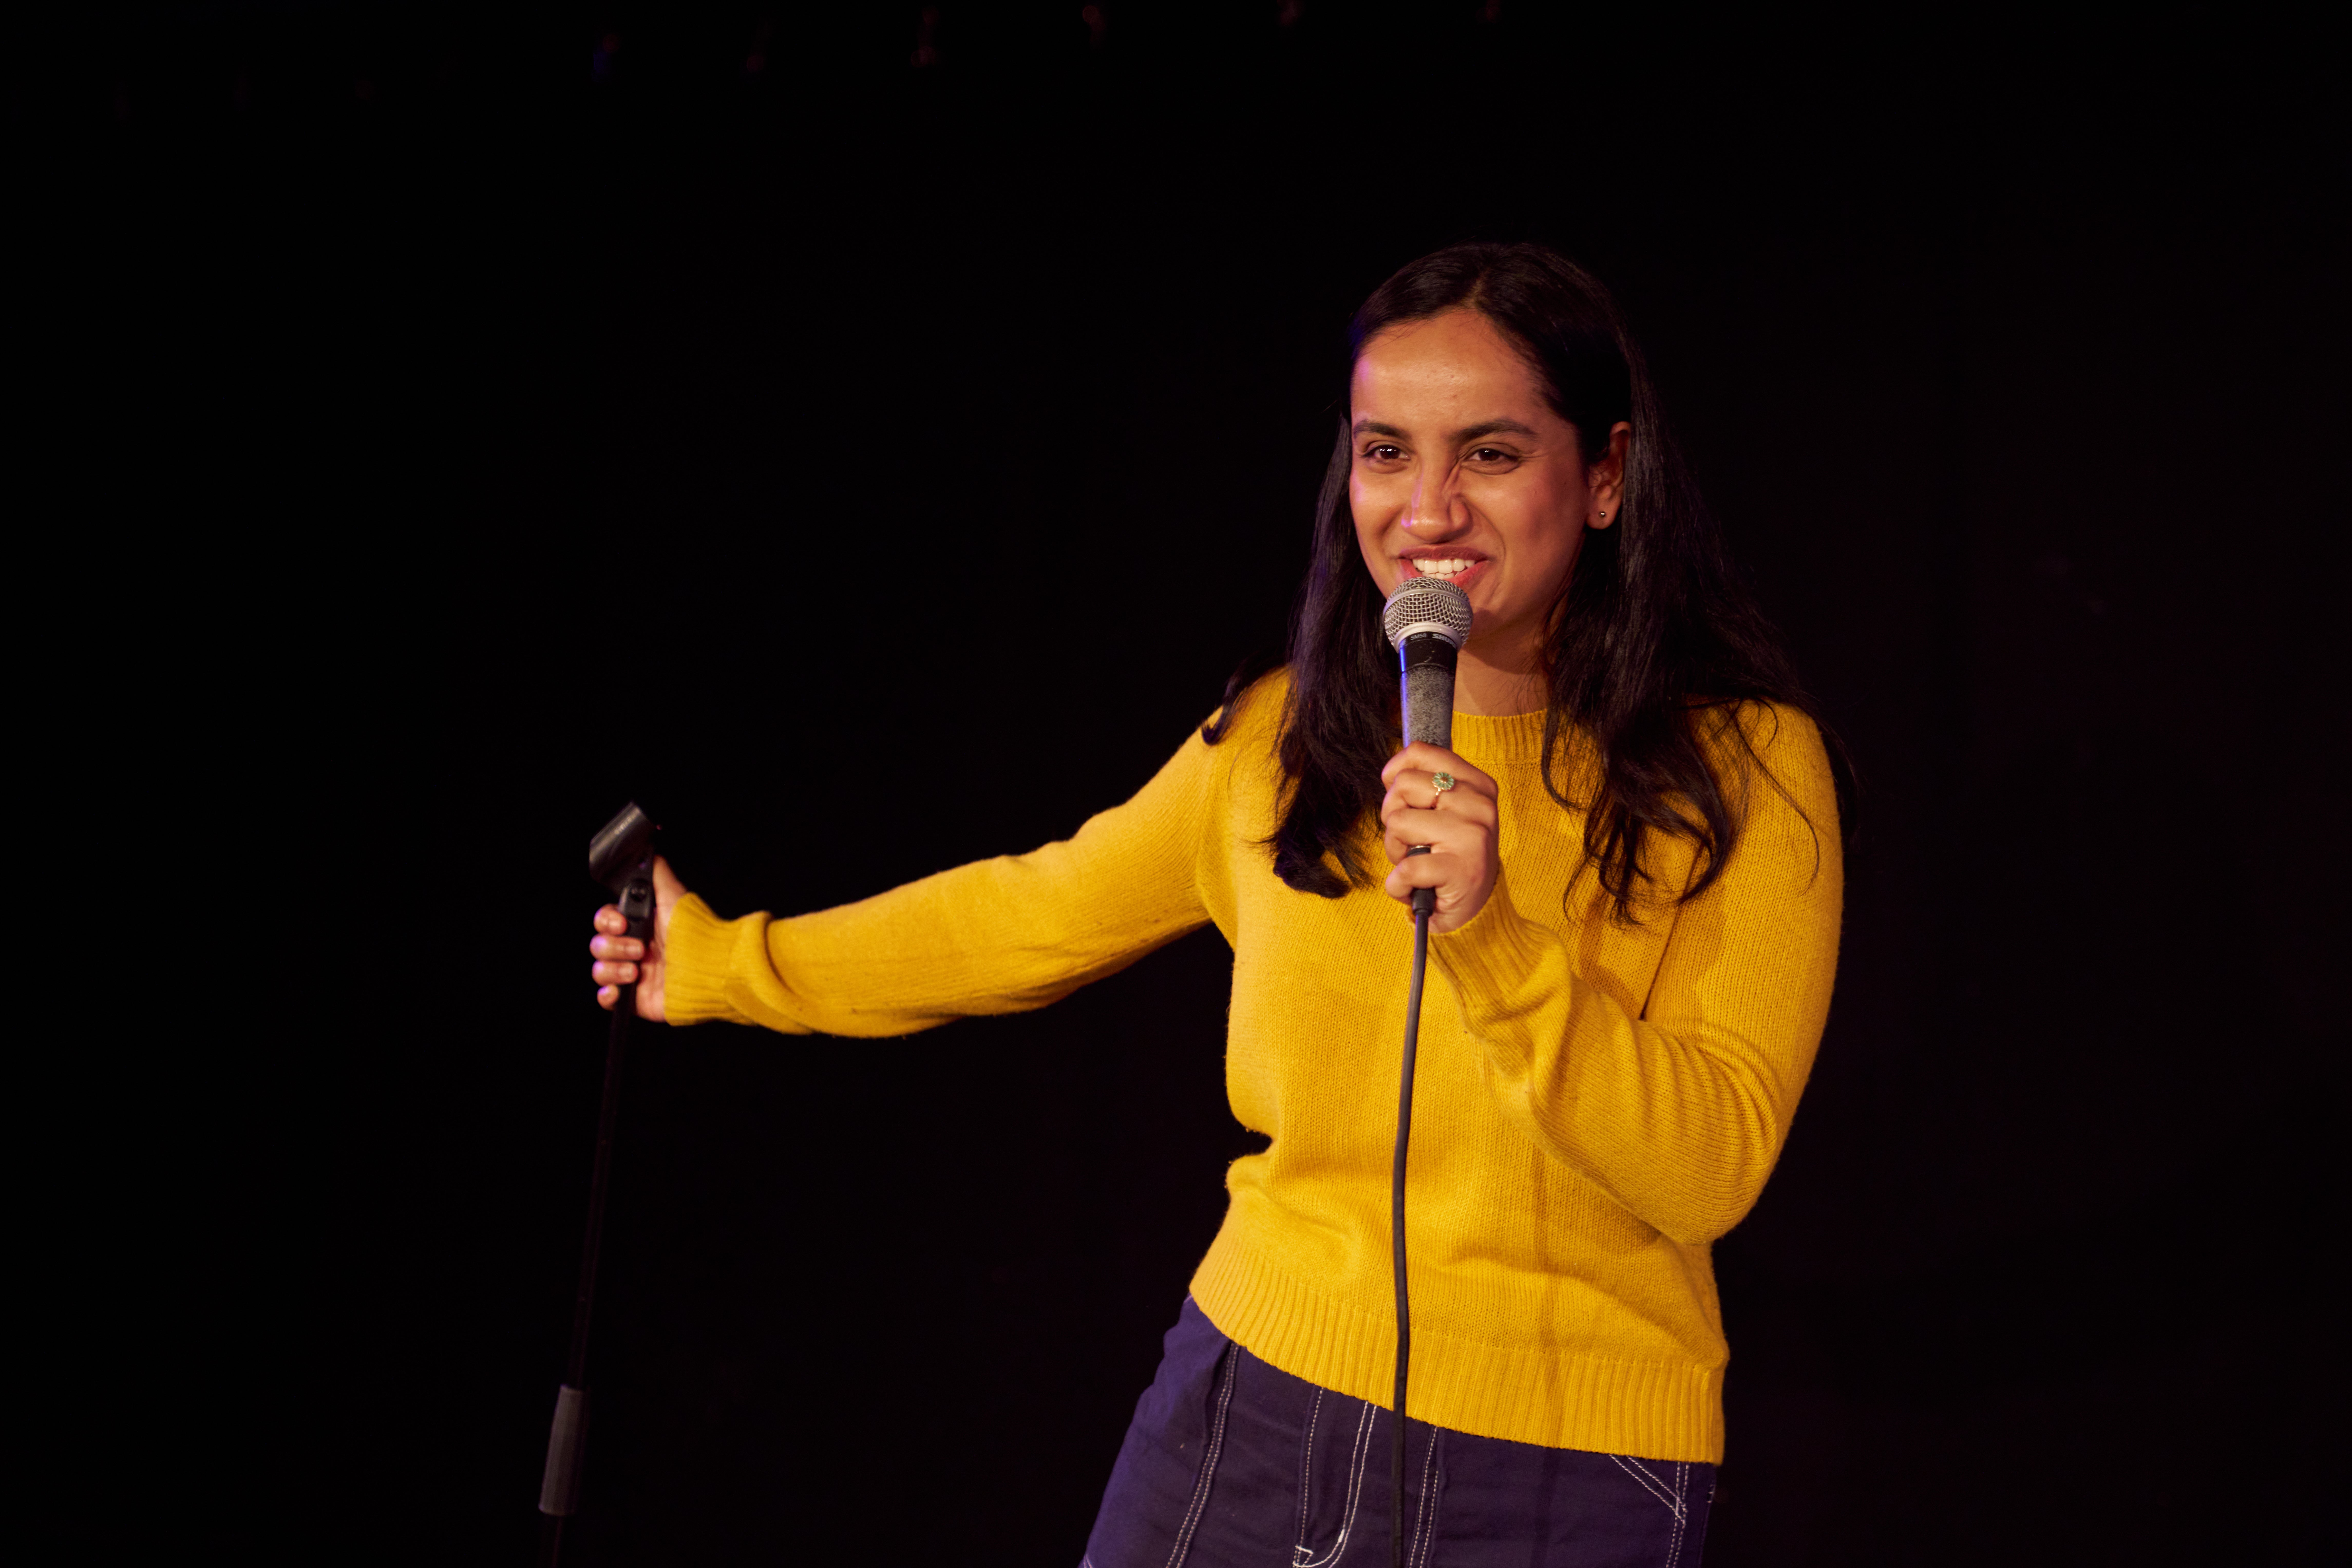 Mumbai-based comic Urooj Ashfaq gets knocked off course by a quieter audience, before the rest of the show unravels